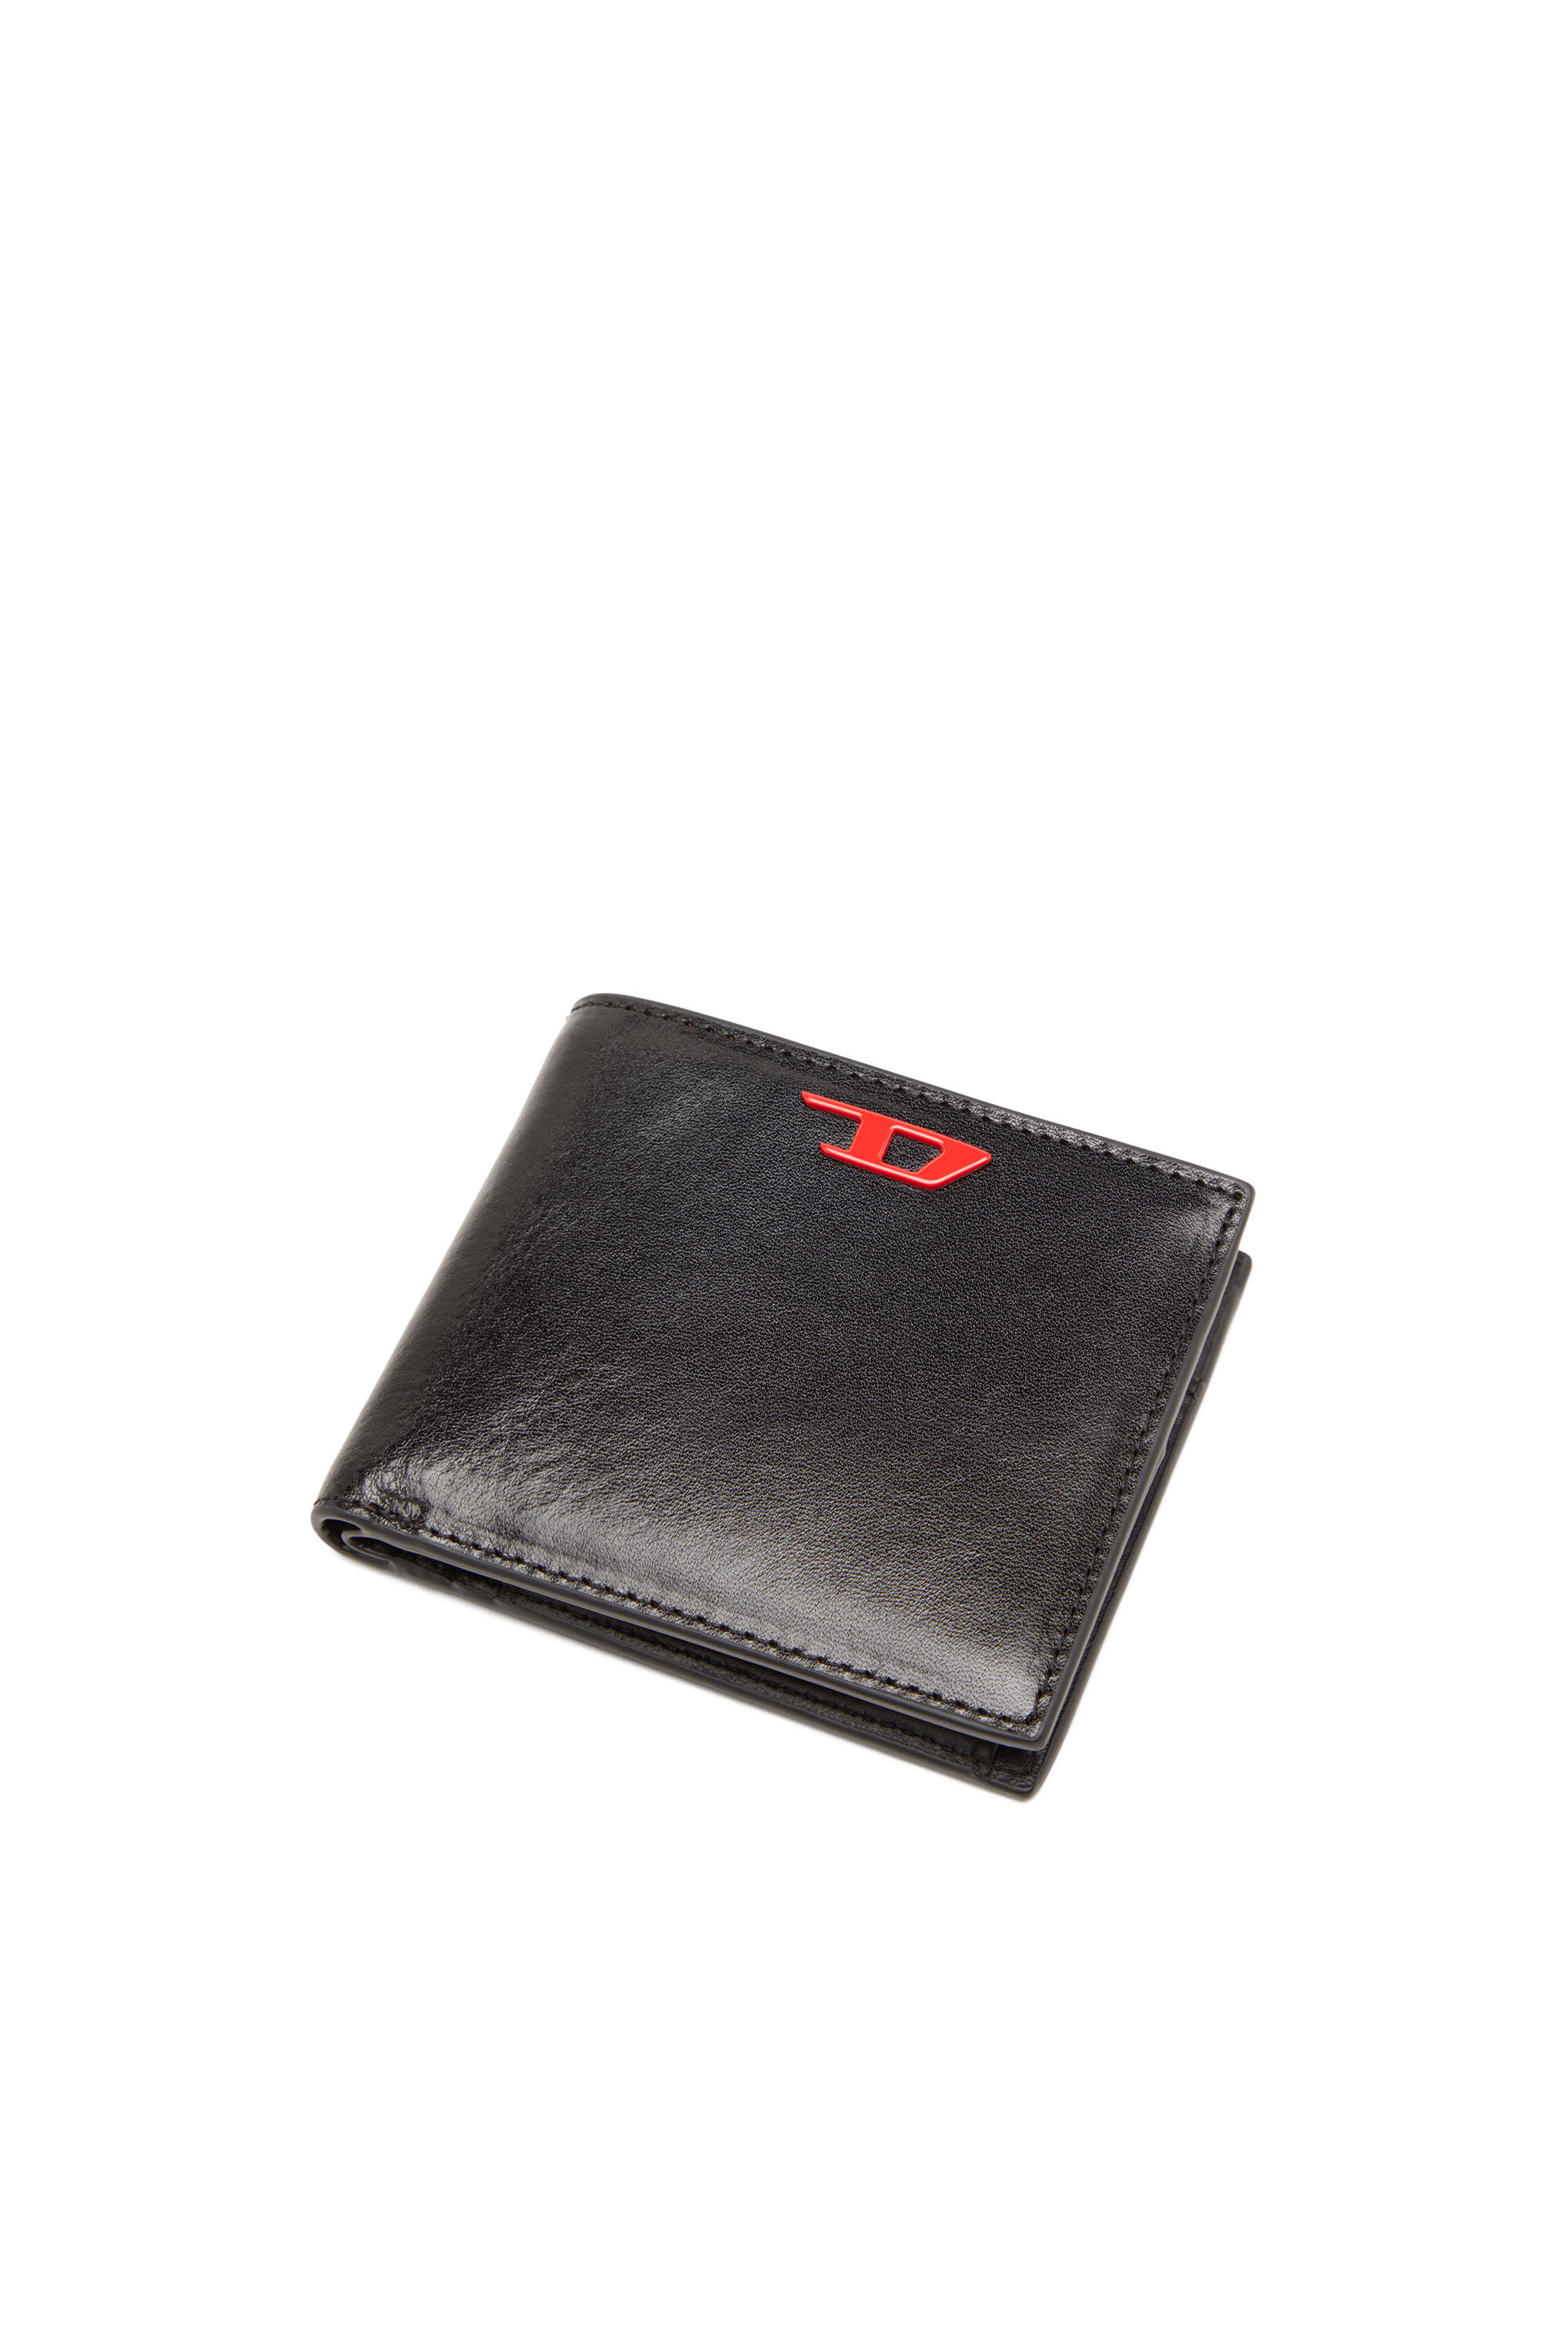 RAVE BI-FOLD COIN S Leather bi-fold wallet with red D plaque 